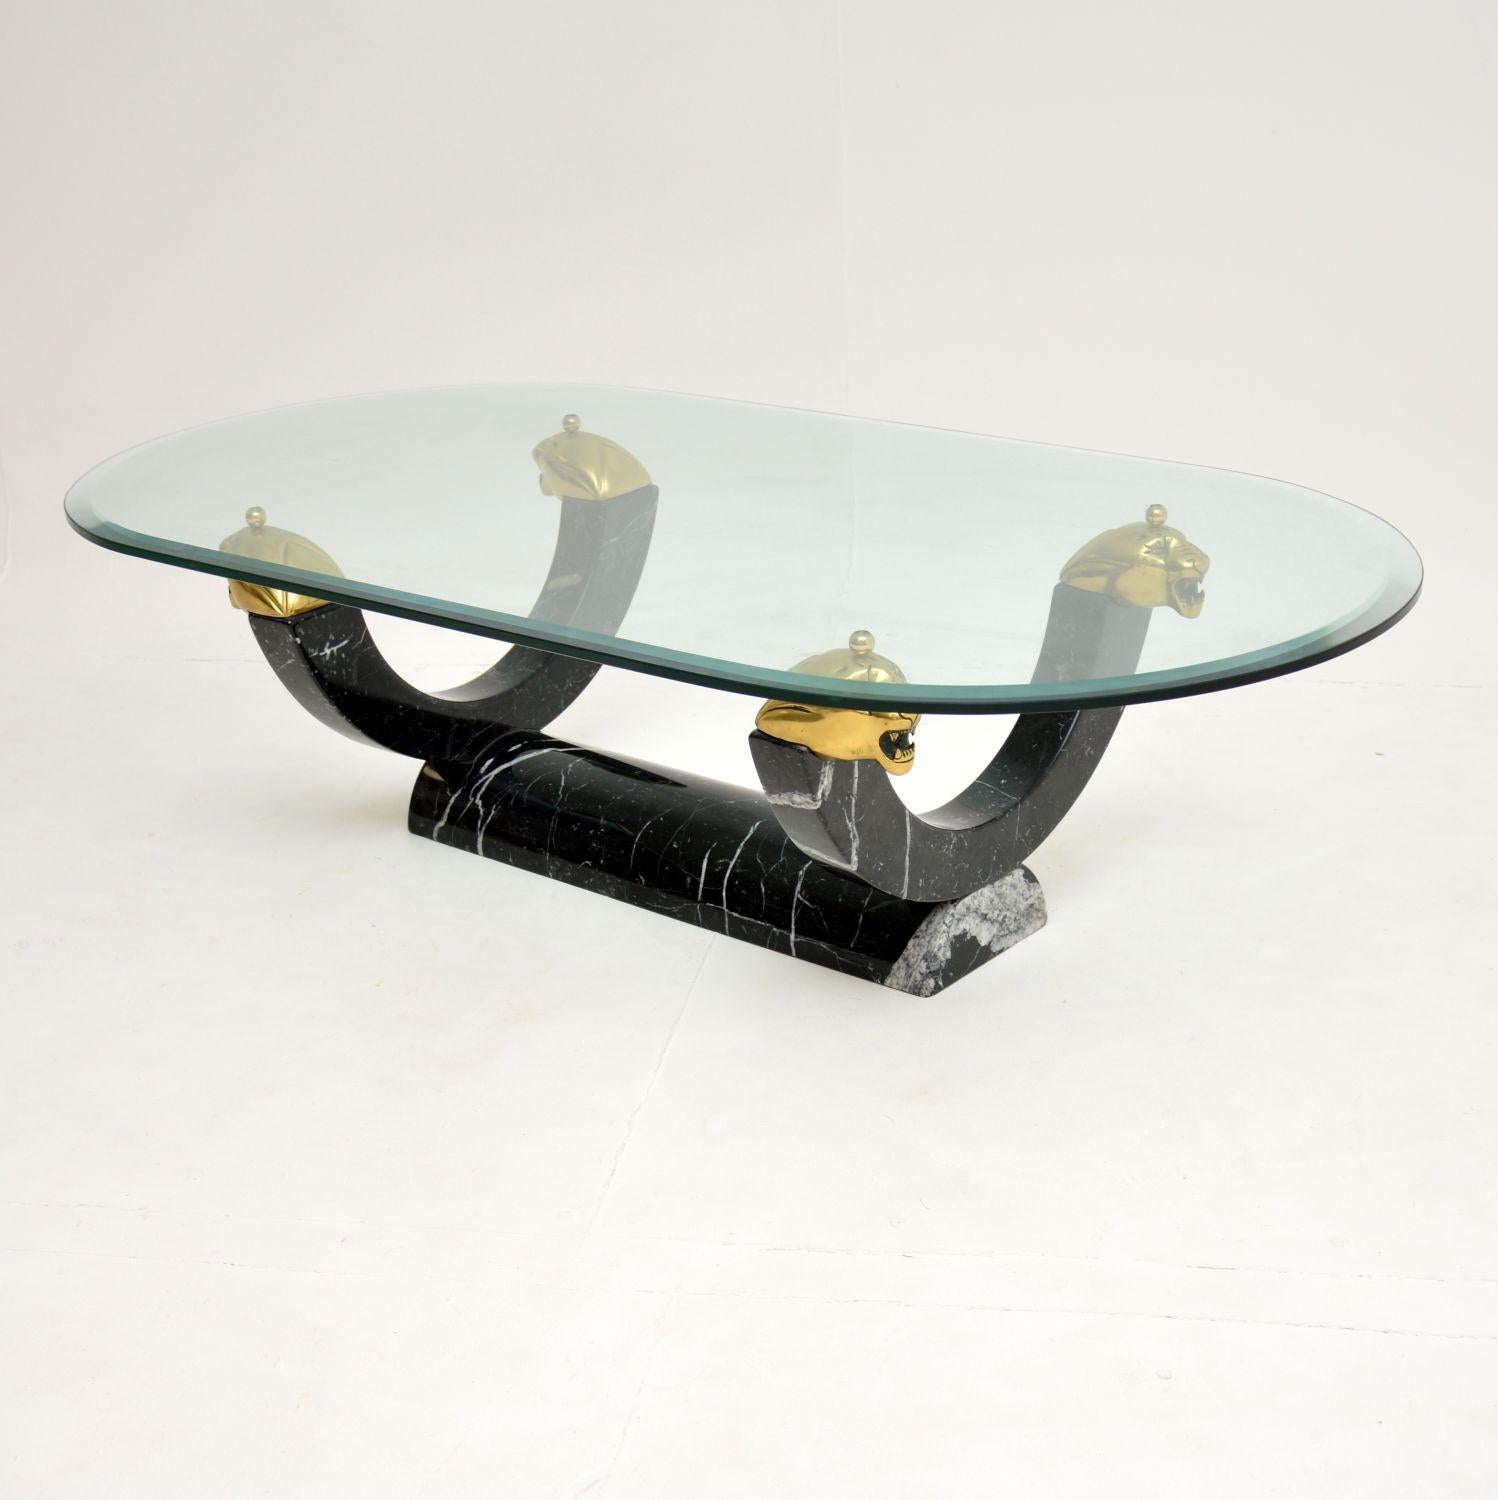 An impressive and very well made vintage coffee table, most likely made in Italy and dating from circa 1970s.

This has a fantastic solid marble base, which has a stunning shape and colour. The large, toughened oval glass top is supported by four